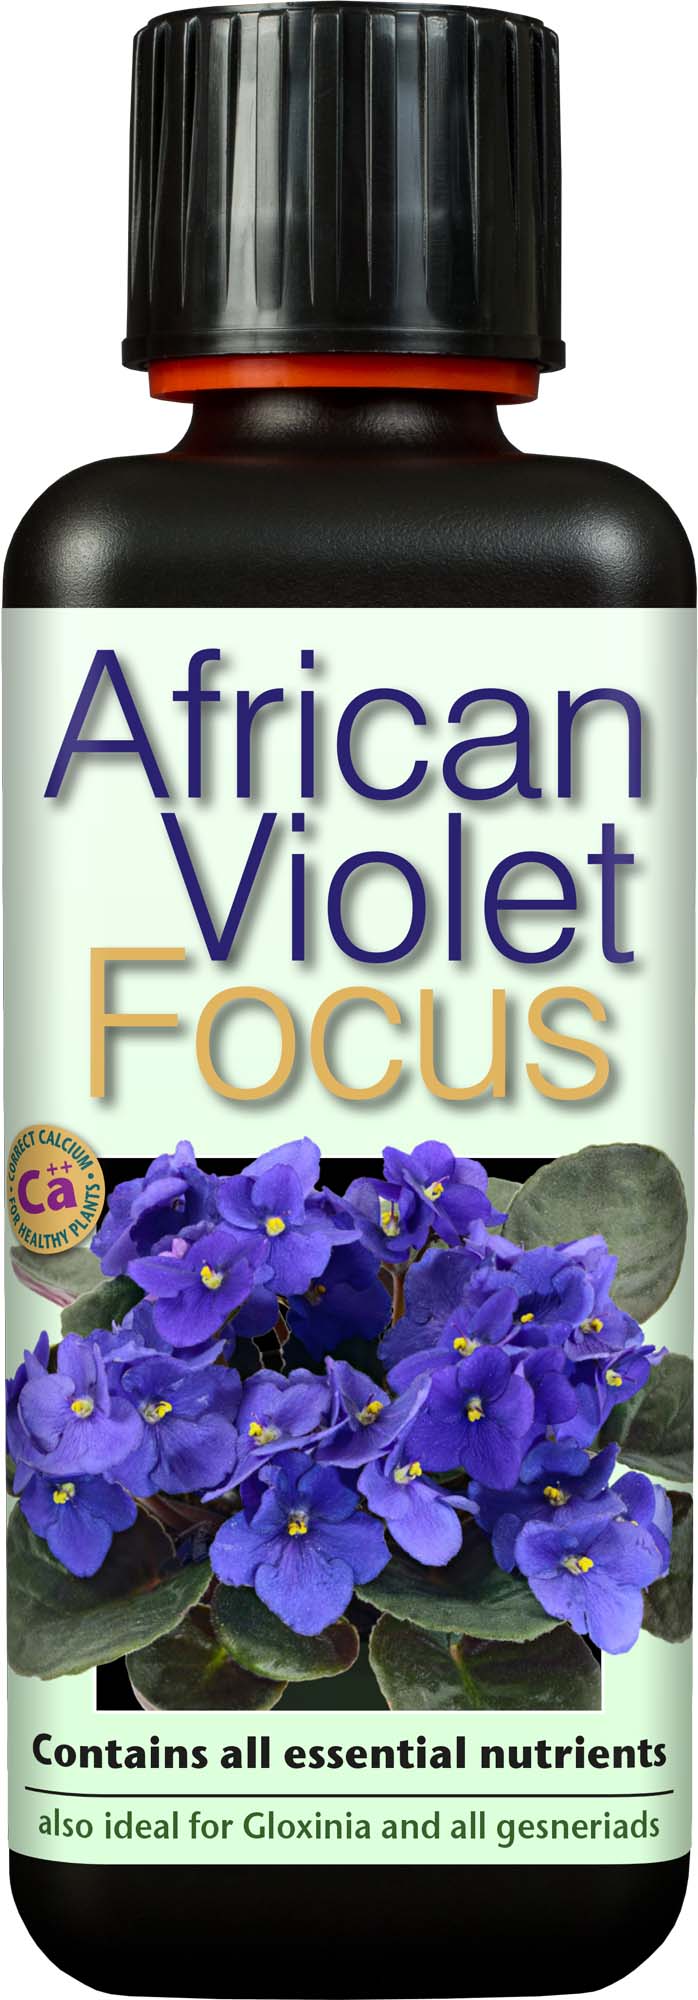 Growth Technology African Violet